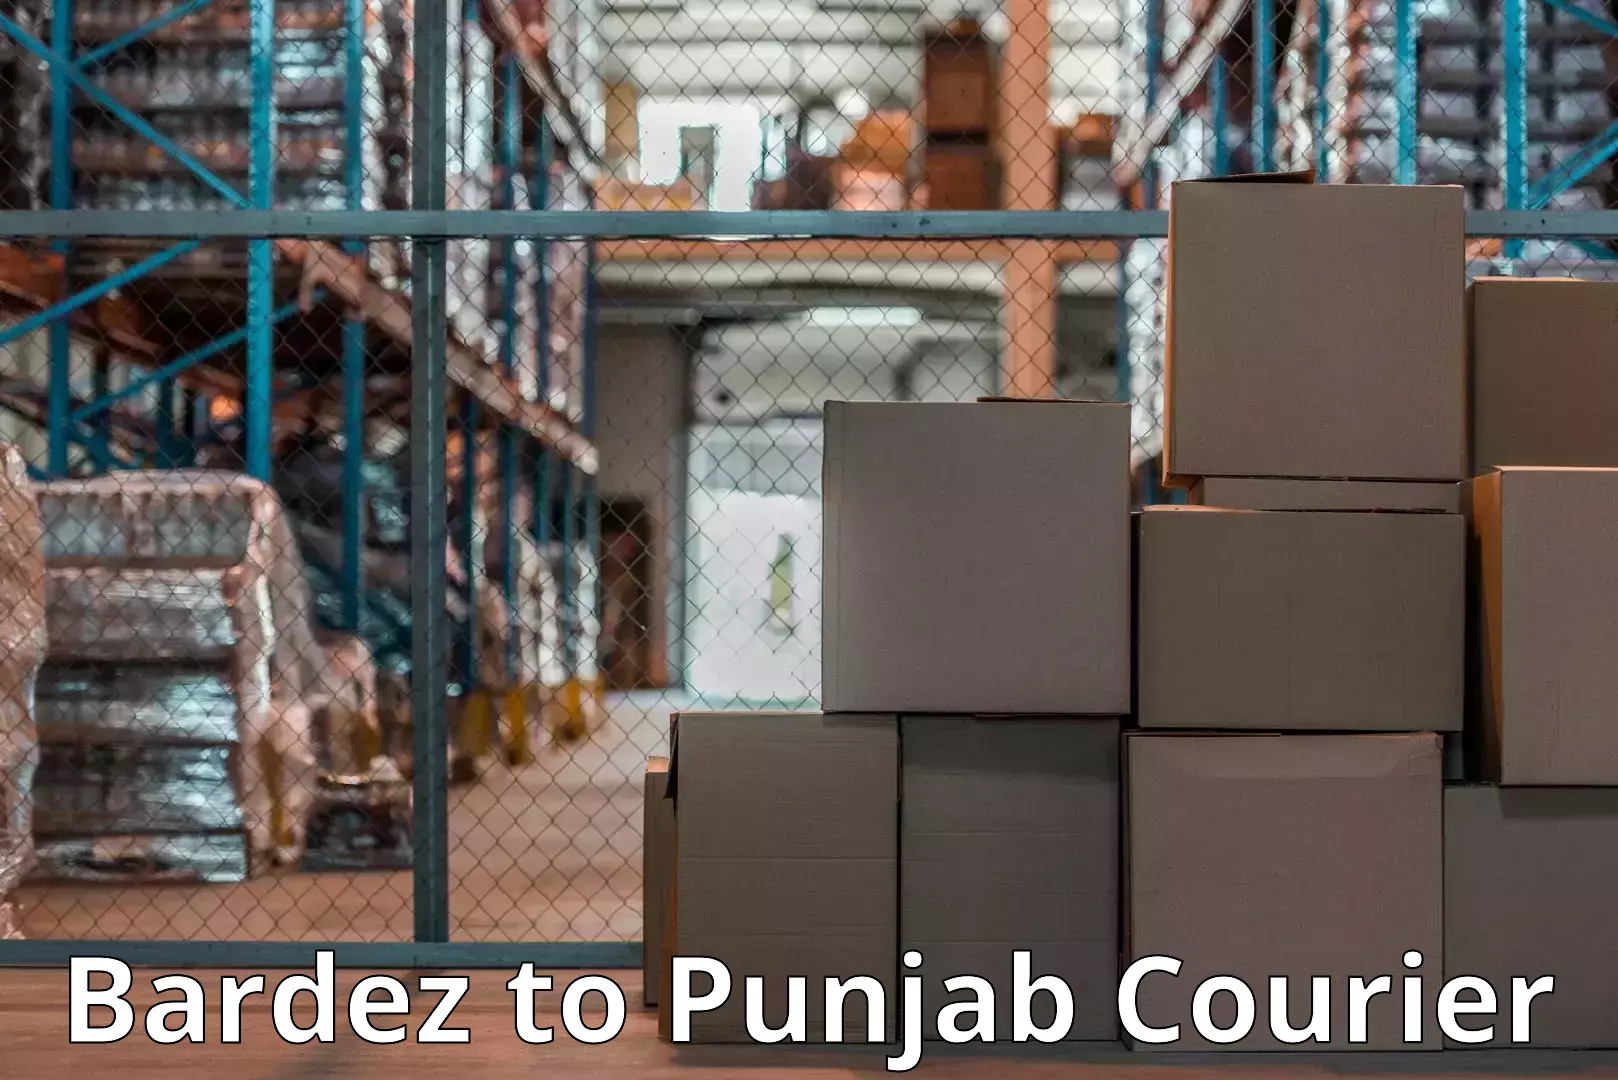 Trusted relocation services Bardez to Punjab